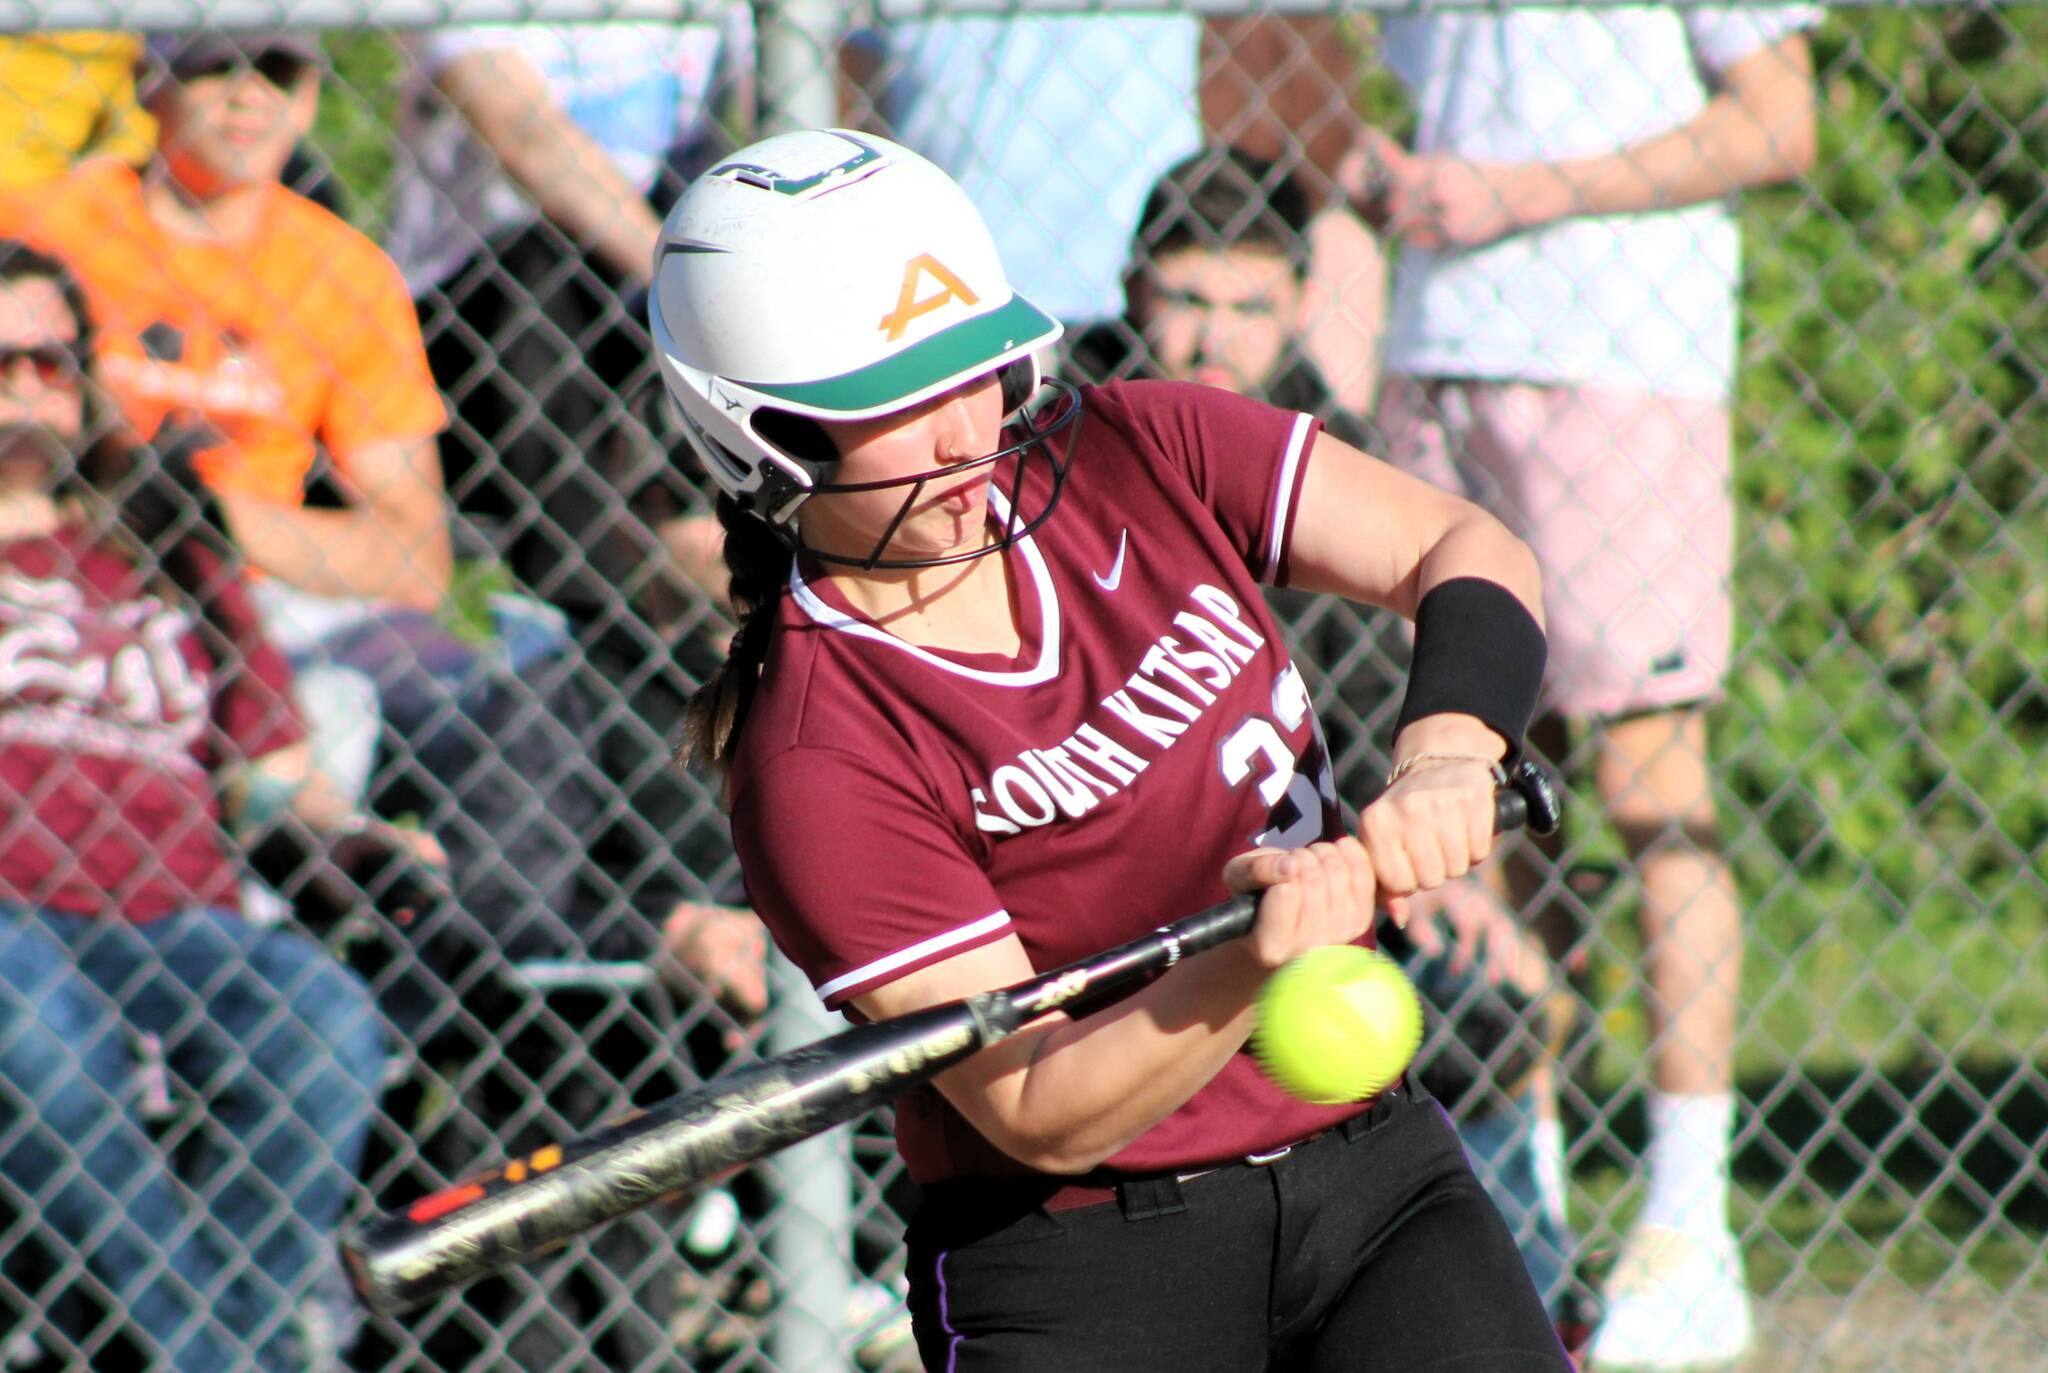 Elisha Meyer/Kitsap News Group photos
Junior Madison Bonilla swings at a pitch in the game against Sumner.